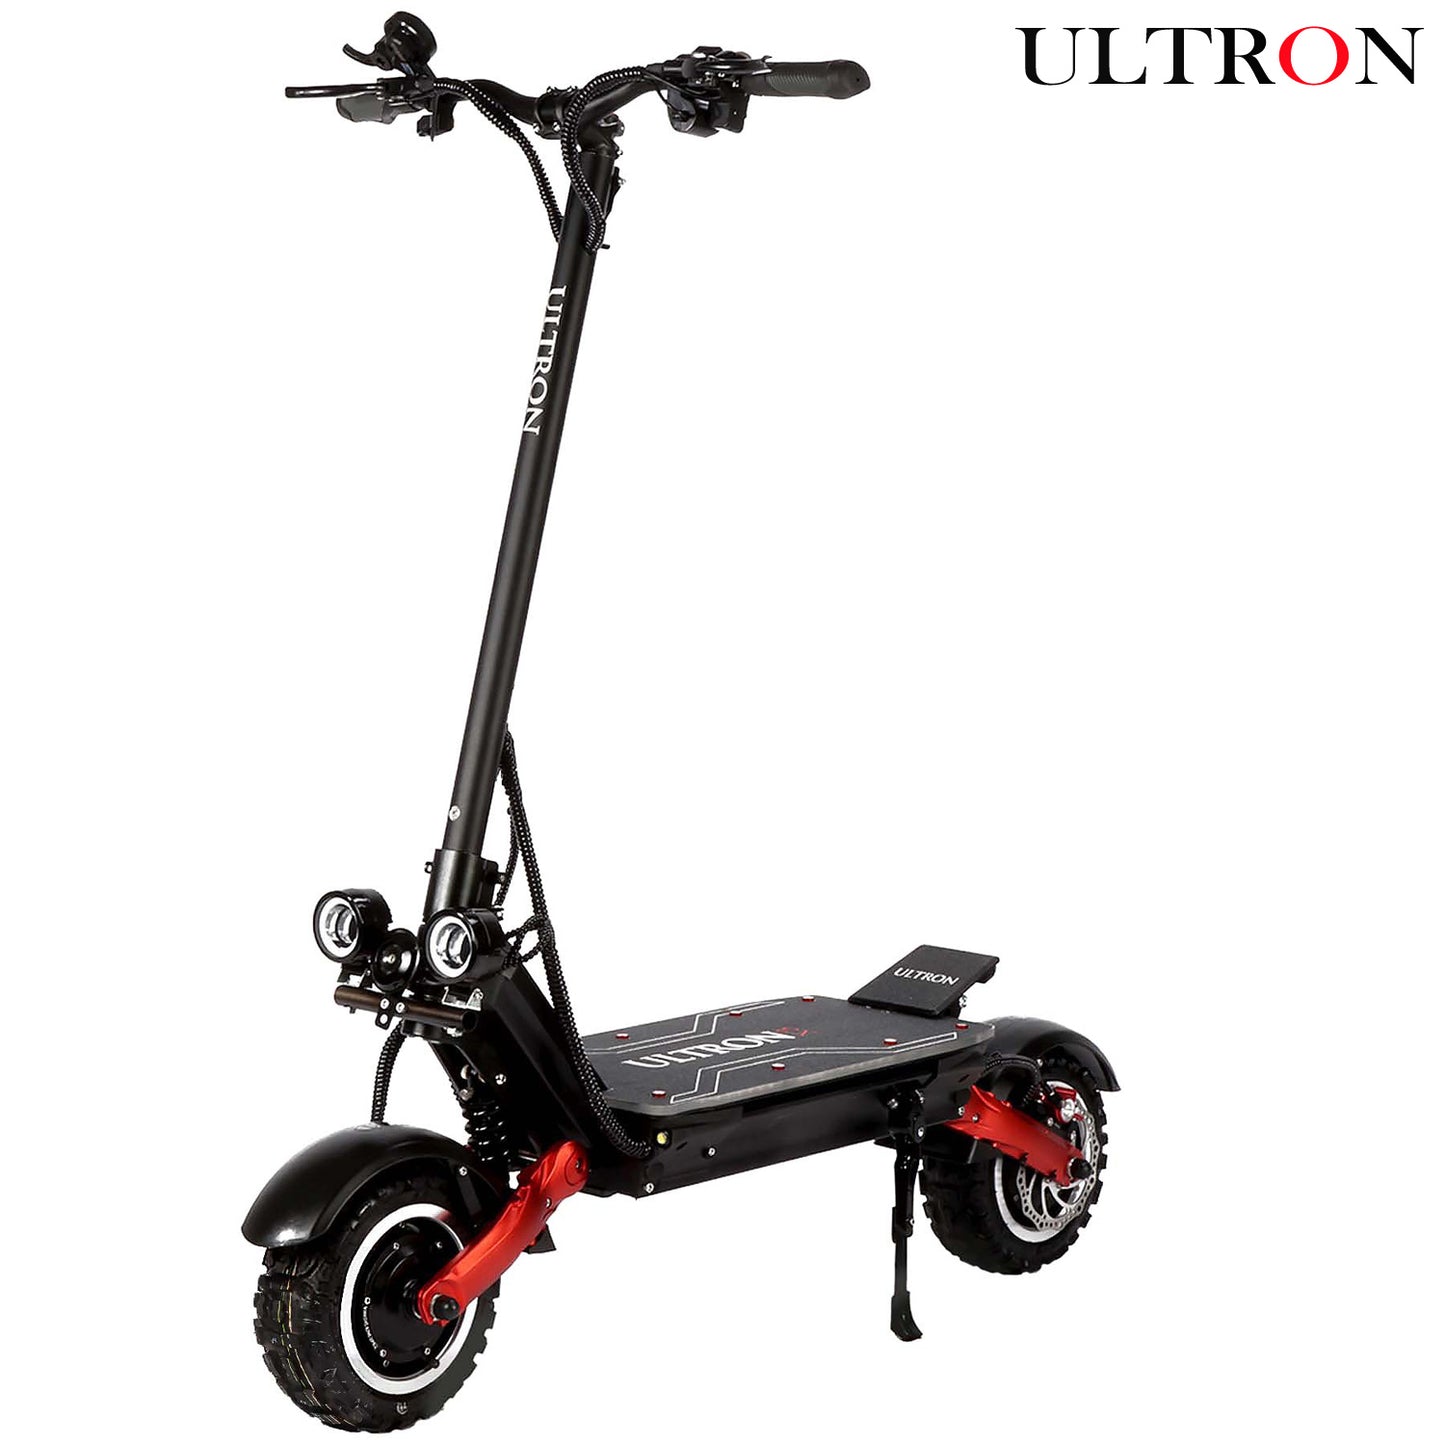 Ultron X3 Pro Electric Scooters